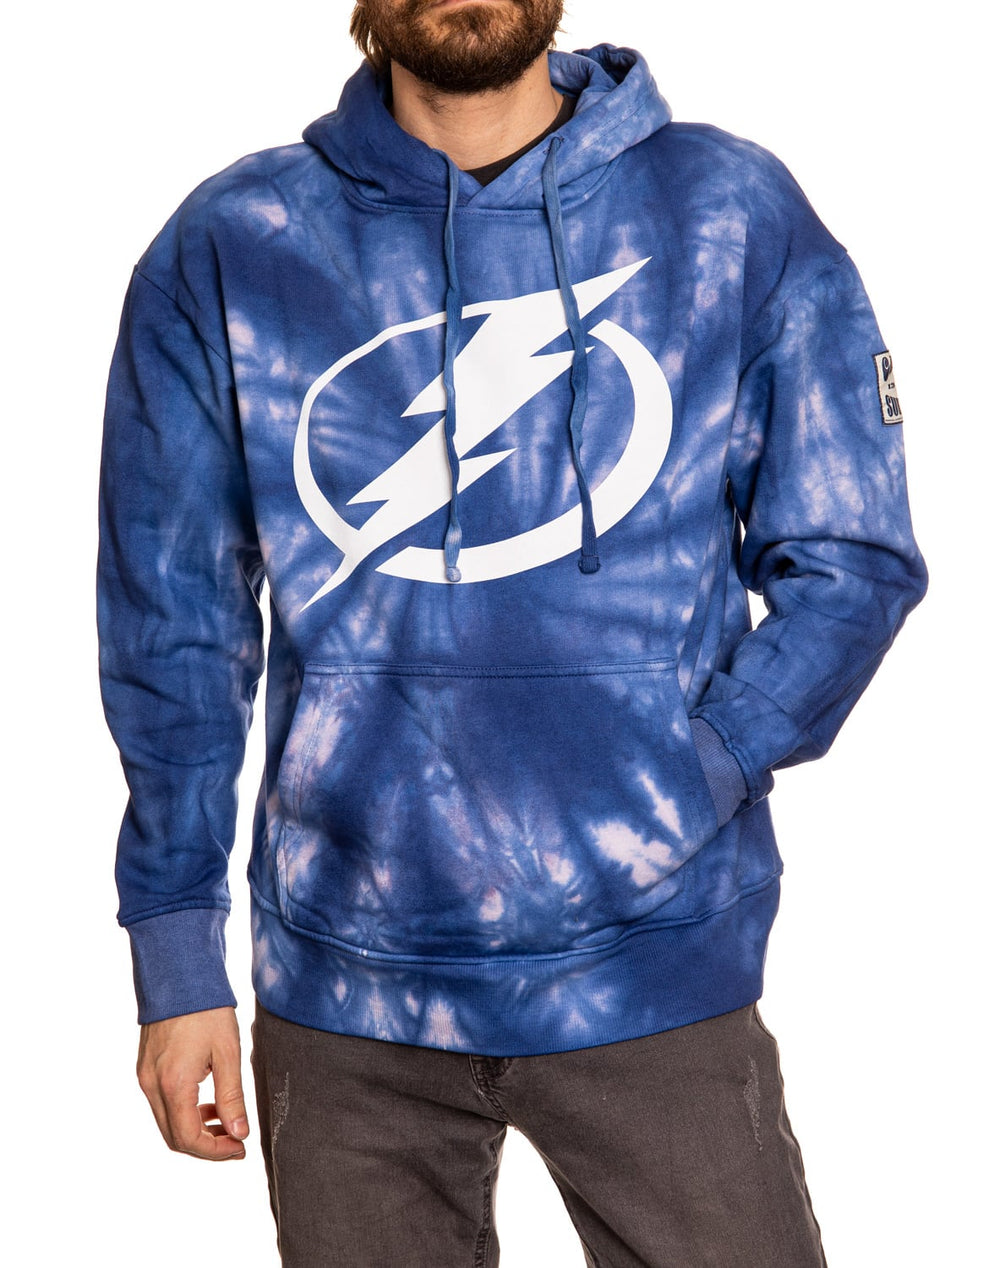 Tampa Bay Lightning Spiral Tie Dye Pullover Hoodie in Blue Front View